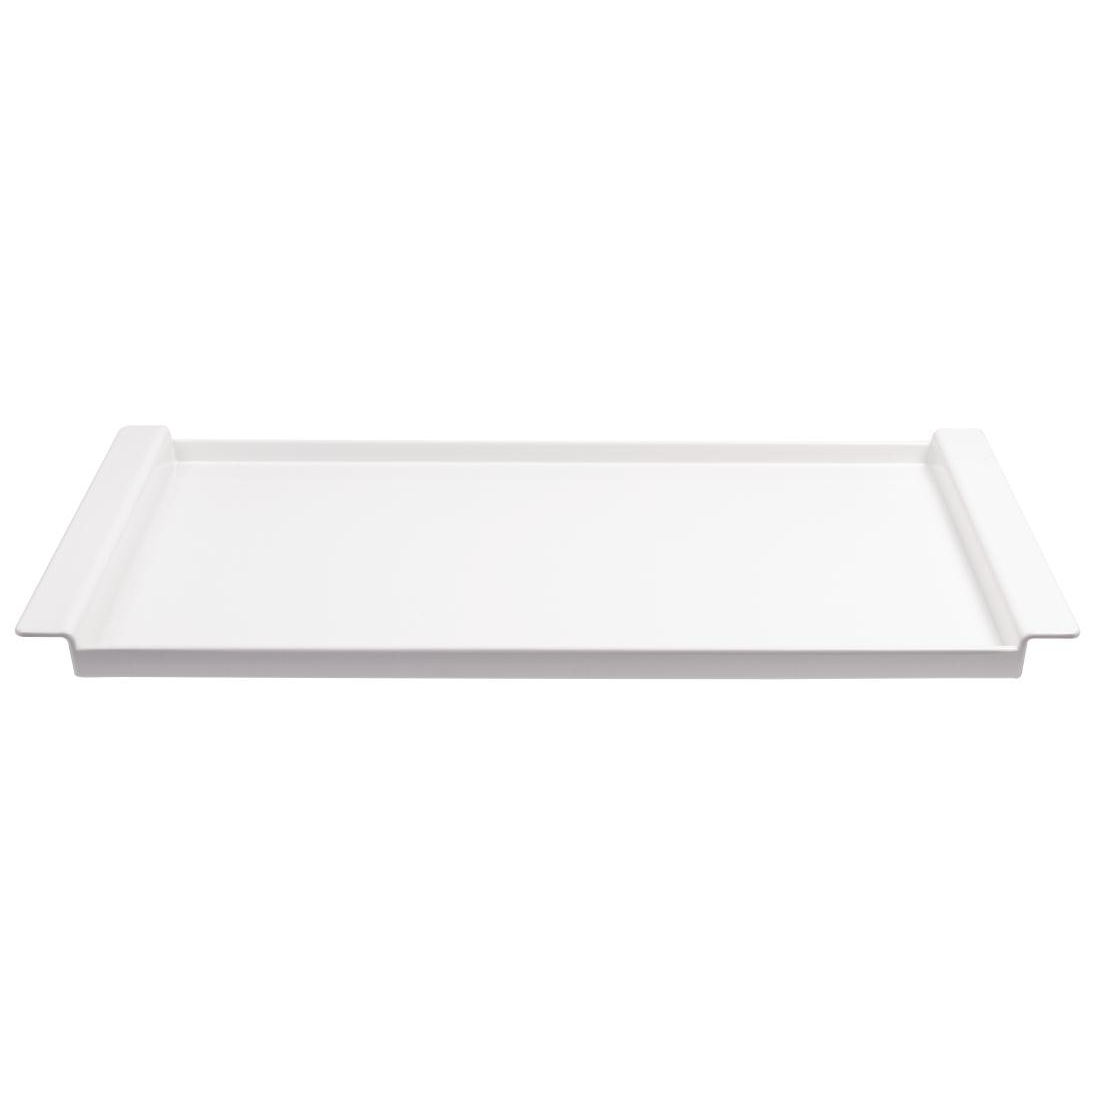 APS Breadstation Tray